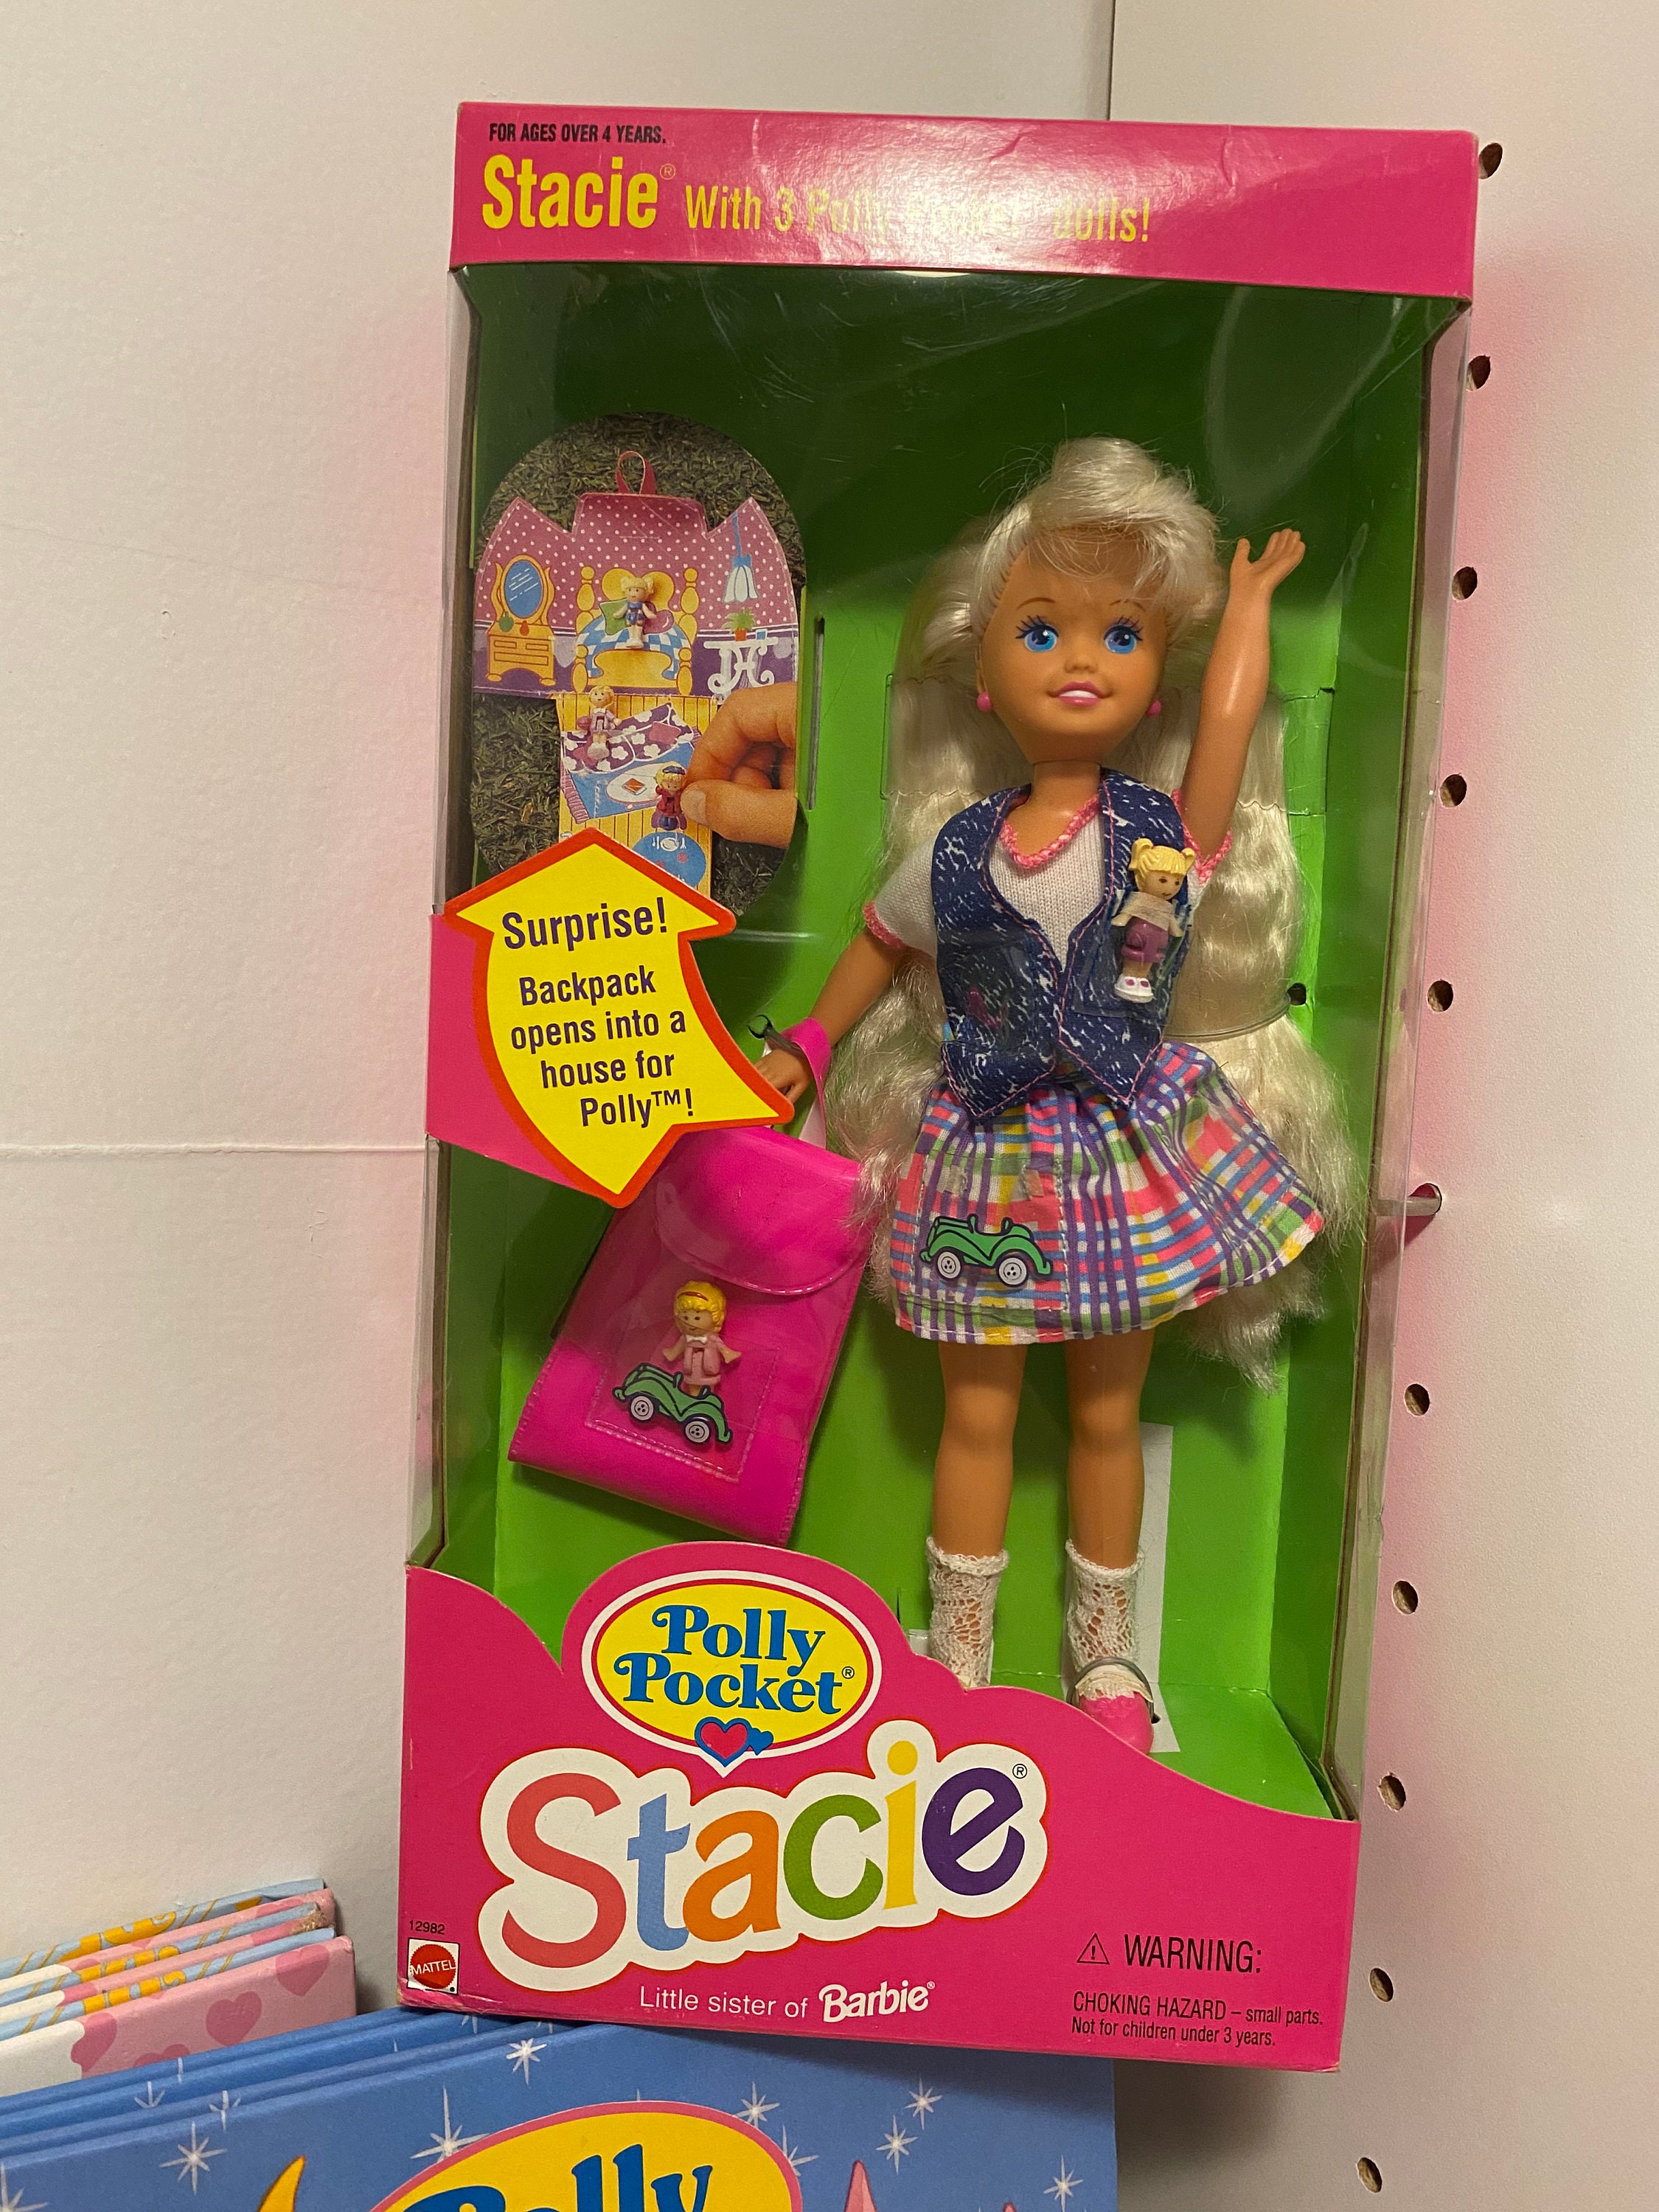 Vintage Stacie Barbie Doll With Polly Pocket New Box - Etsy